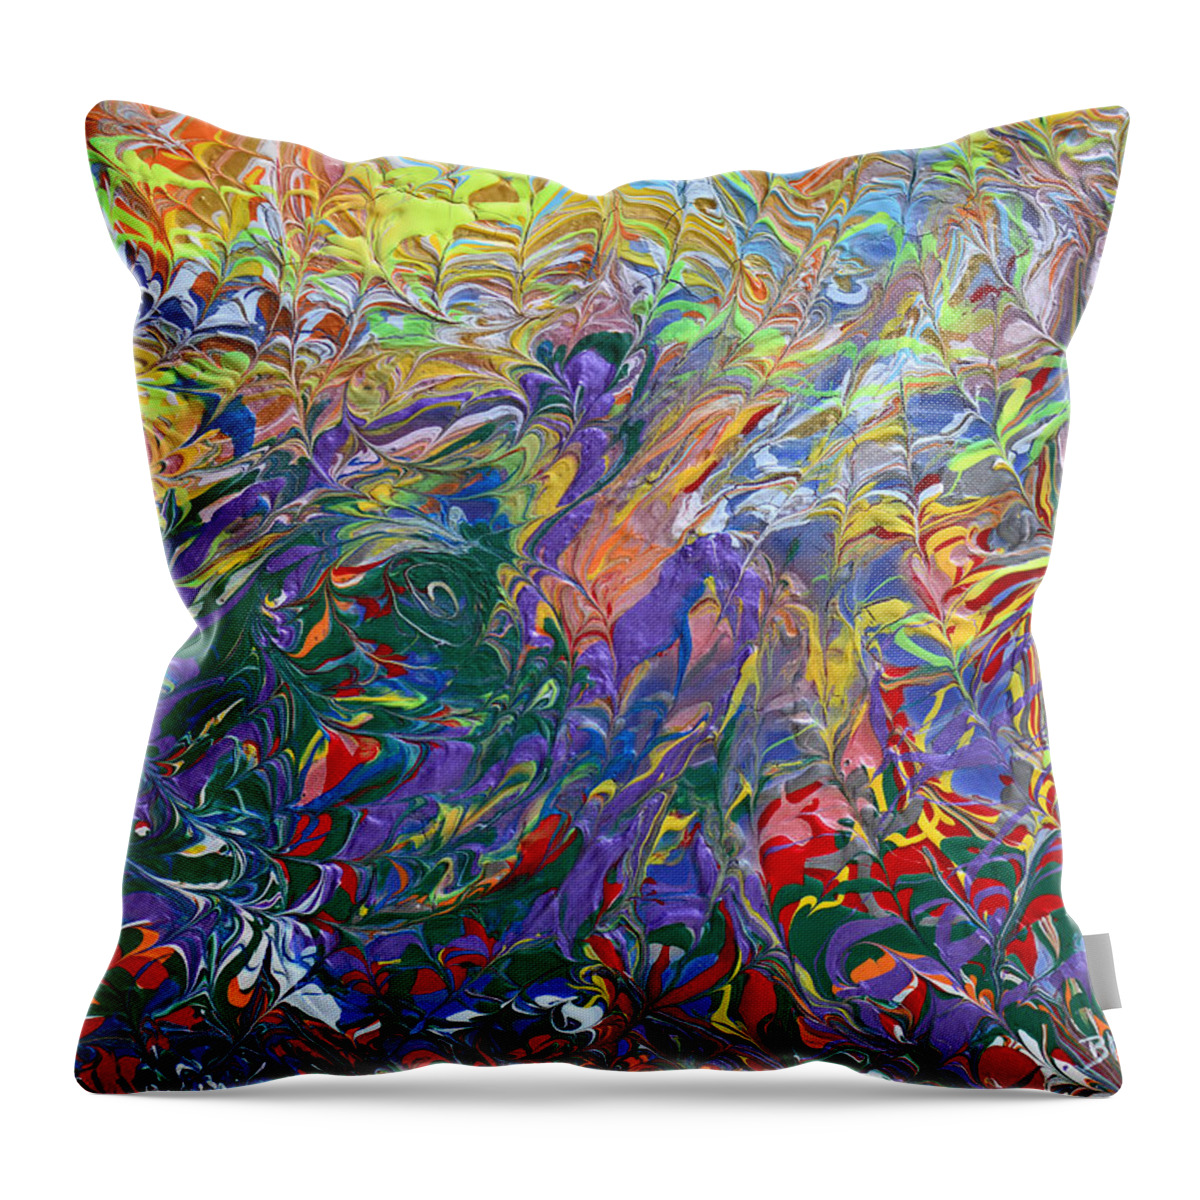 Vibrant Abstract Throw Pillow featuring the painting All That Jazz by Donna Blackhall